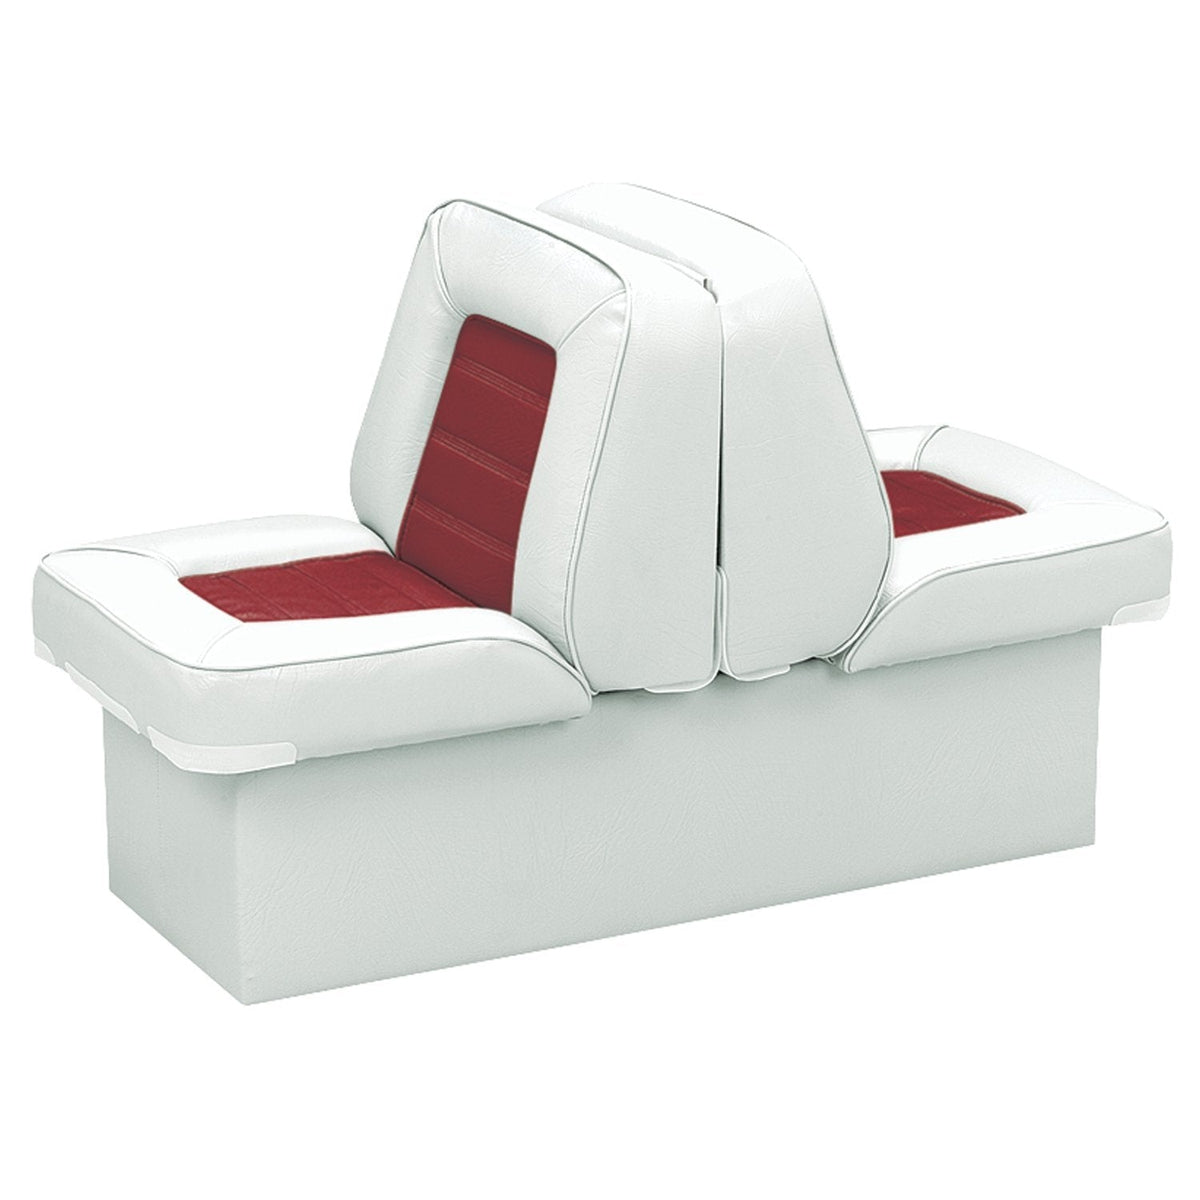 Wise Oversized - Not Qualified for Free Shipping Wise Lounge Seat Deluxe Skyline White #8WD505P-1-710